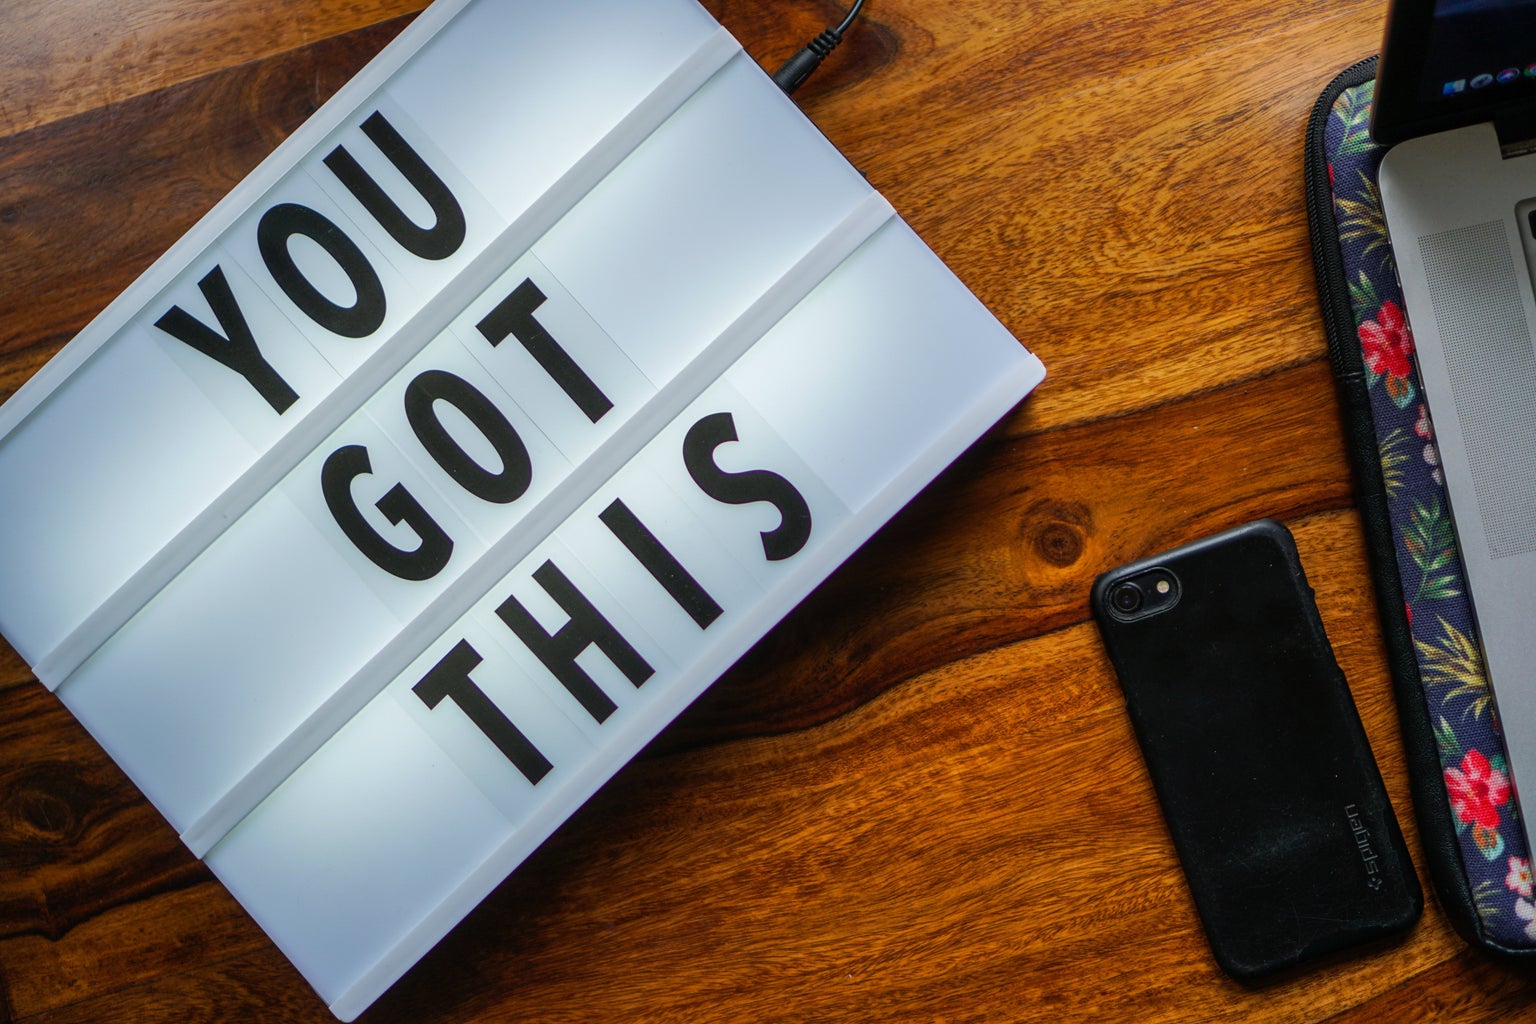 "You Got This" sign with iPhone next to it